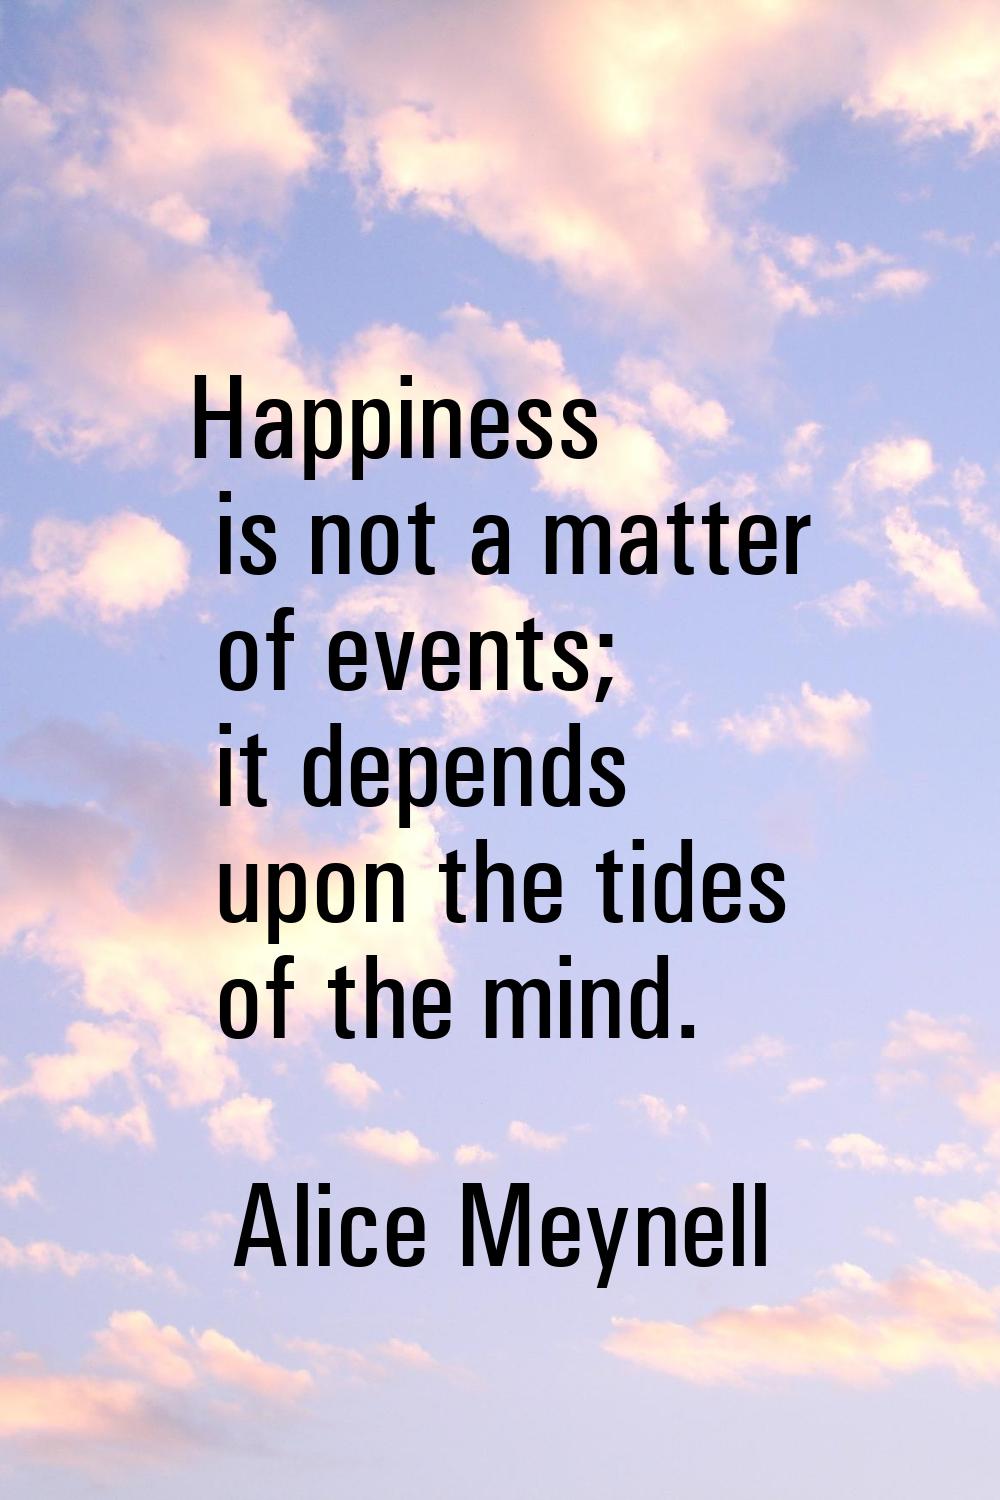 Happiness is not a matter of events; it depends upon the tides of the mind.